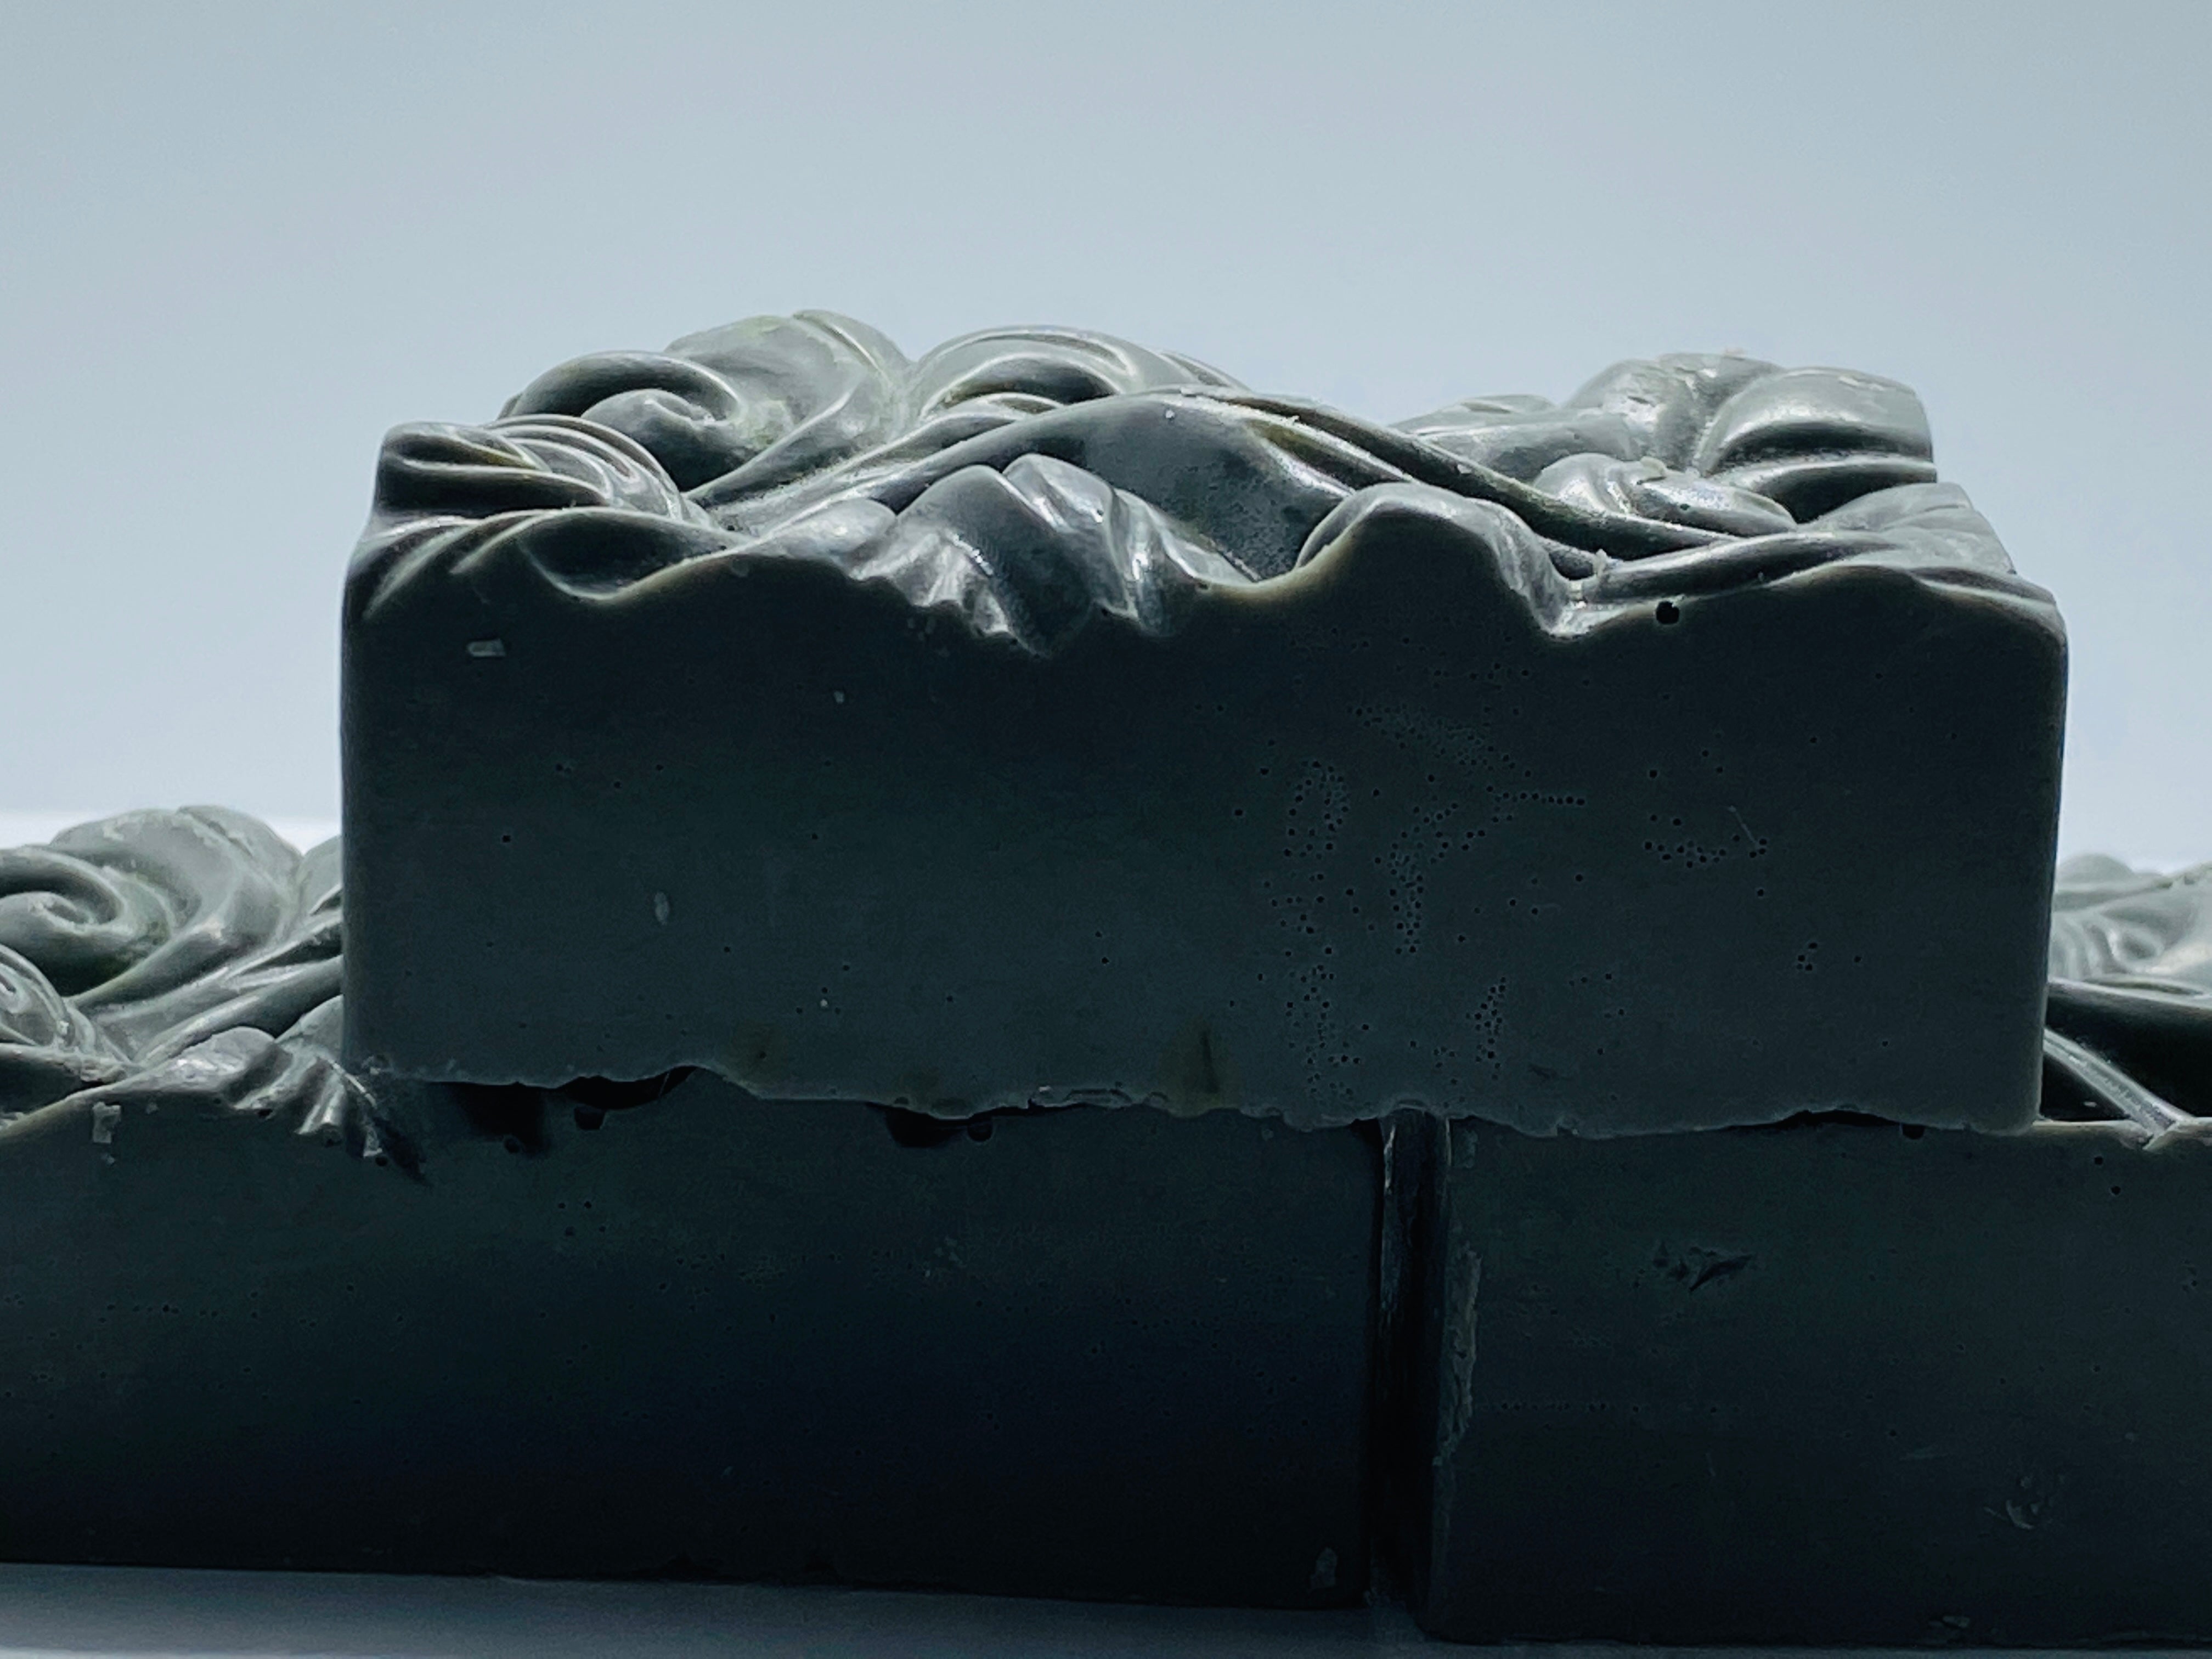 Valley of Waves Soap | with Patchouli | Activated Charcoal | Shea Butter